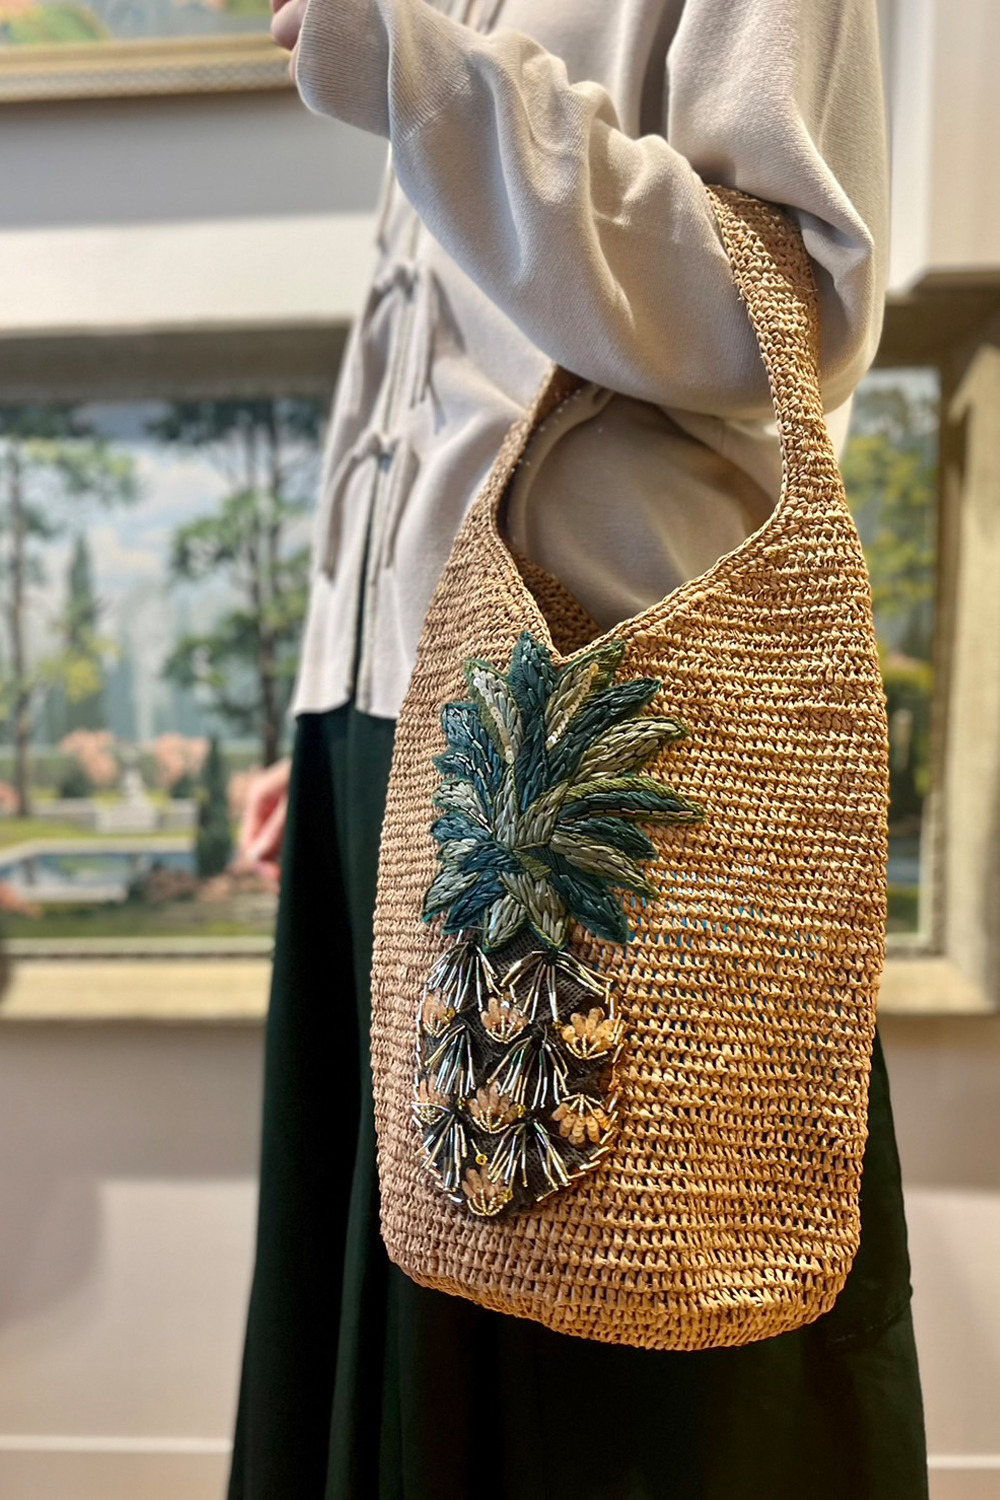 Pineapple Couture embroidery バッグ 詳細画像 ベージュ 8